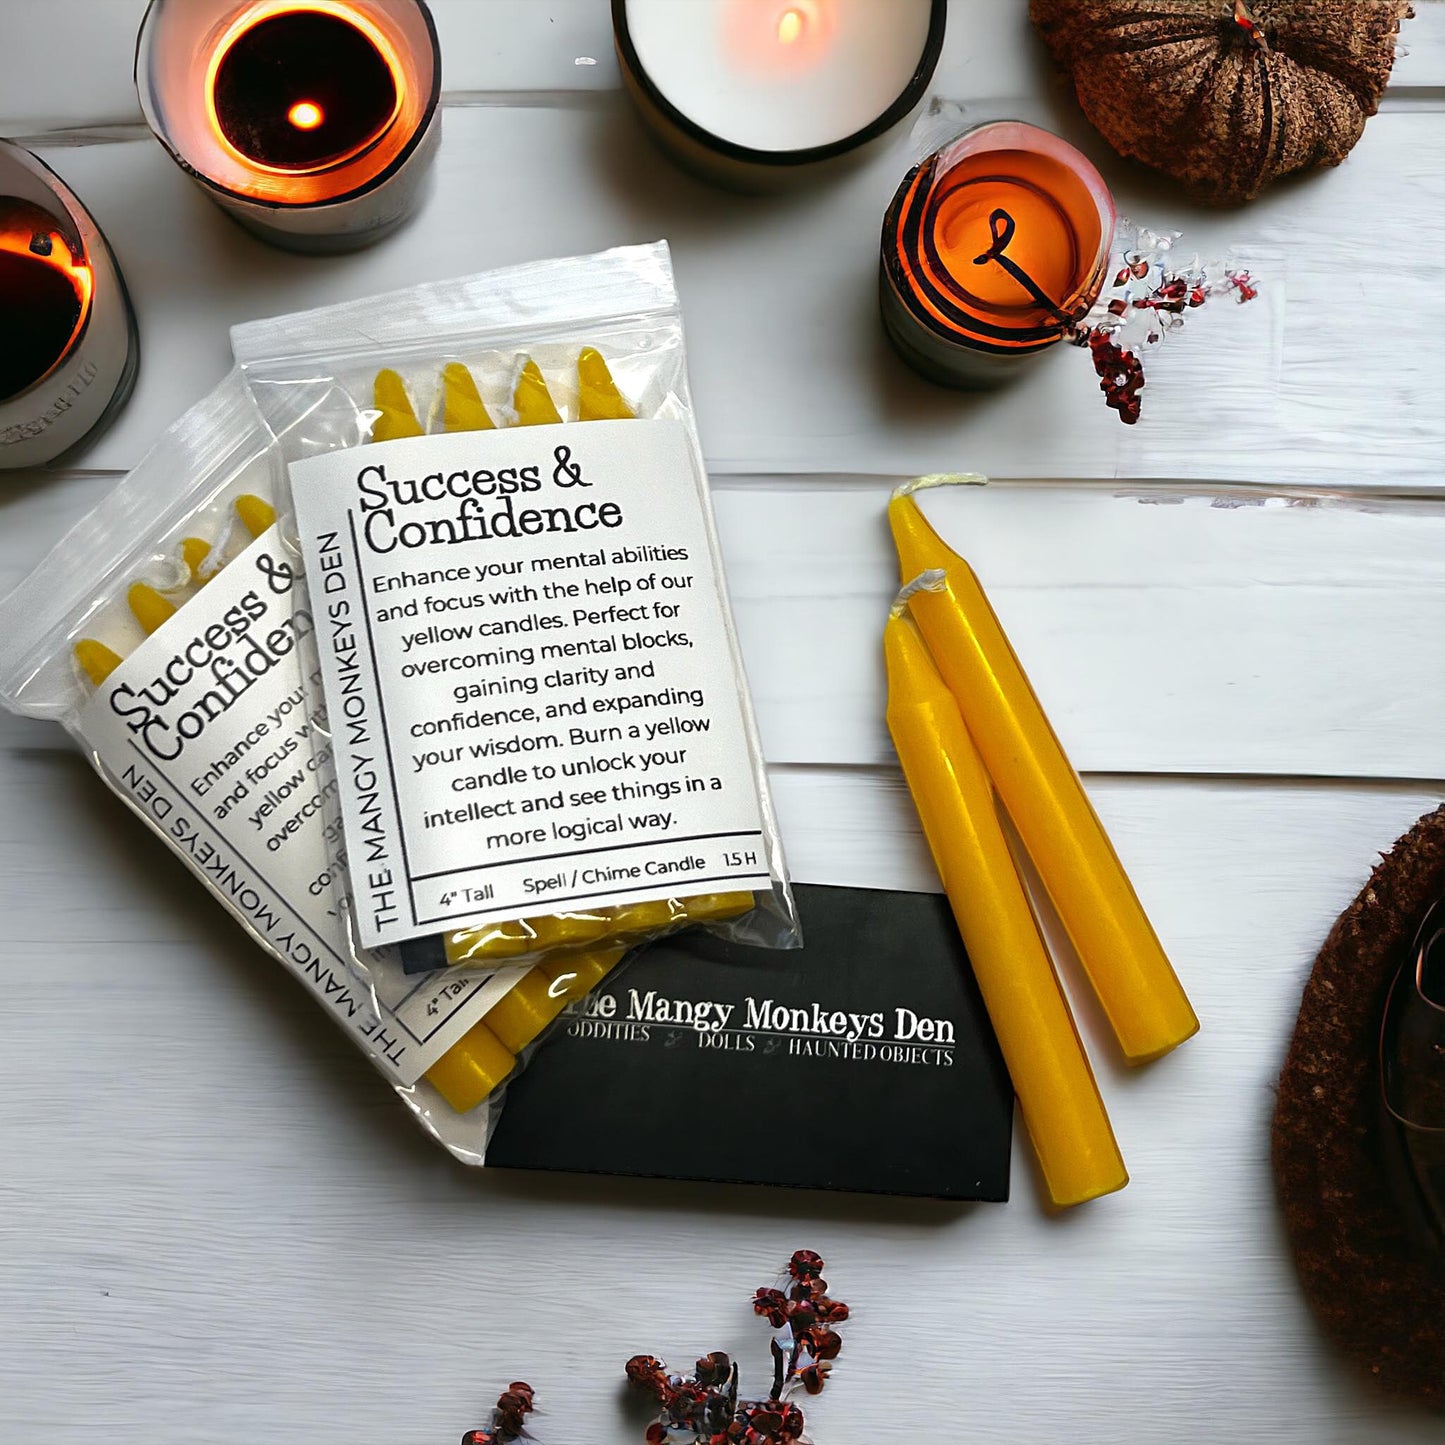 4 PK Success & Confidence Yellow Power Spell Candles 4" Chime Candles Witch Ritual Candle, Small Bulk Candles, Witchcraft Oddity Occult Gift